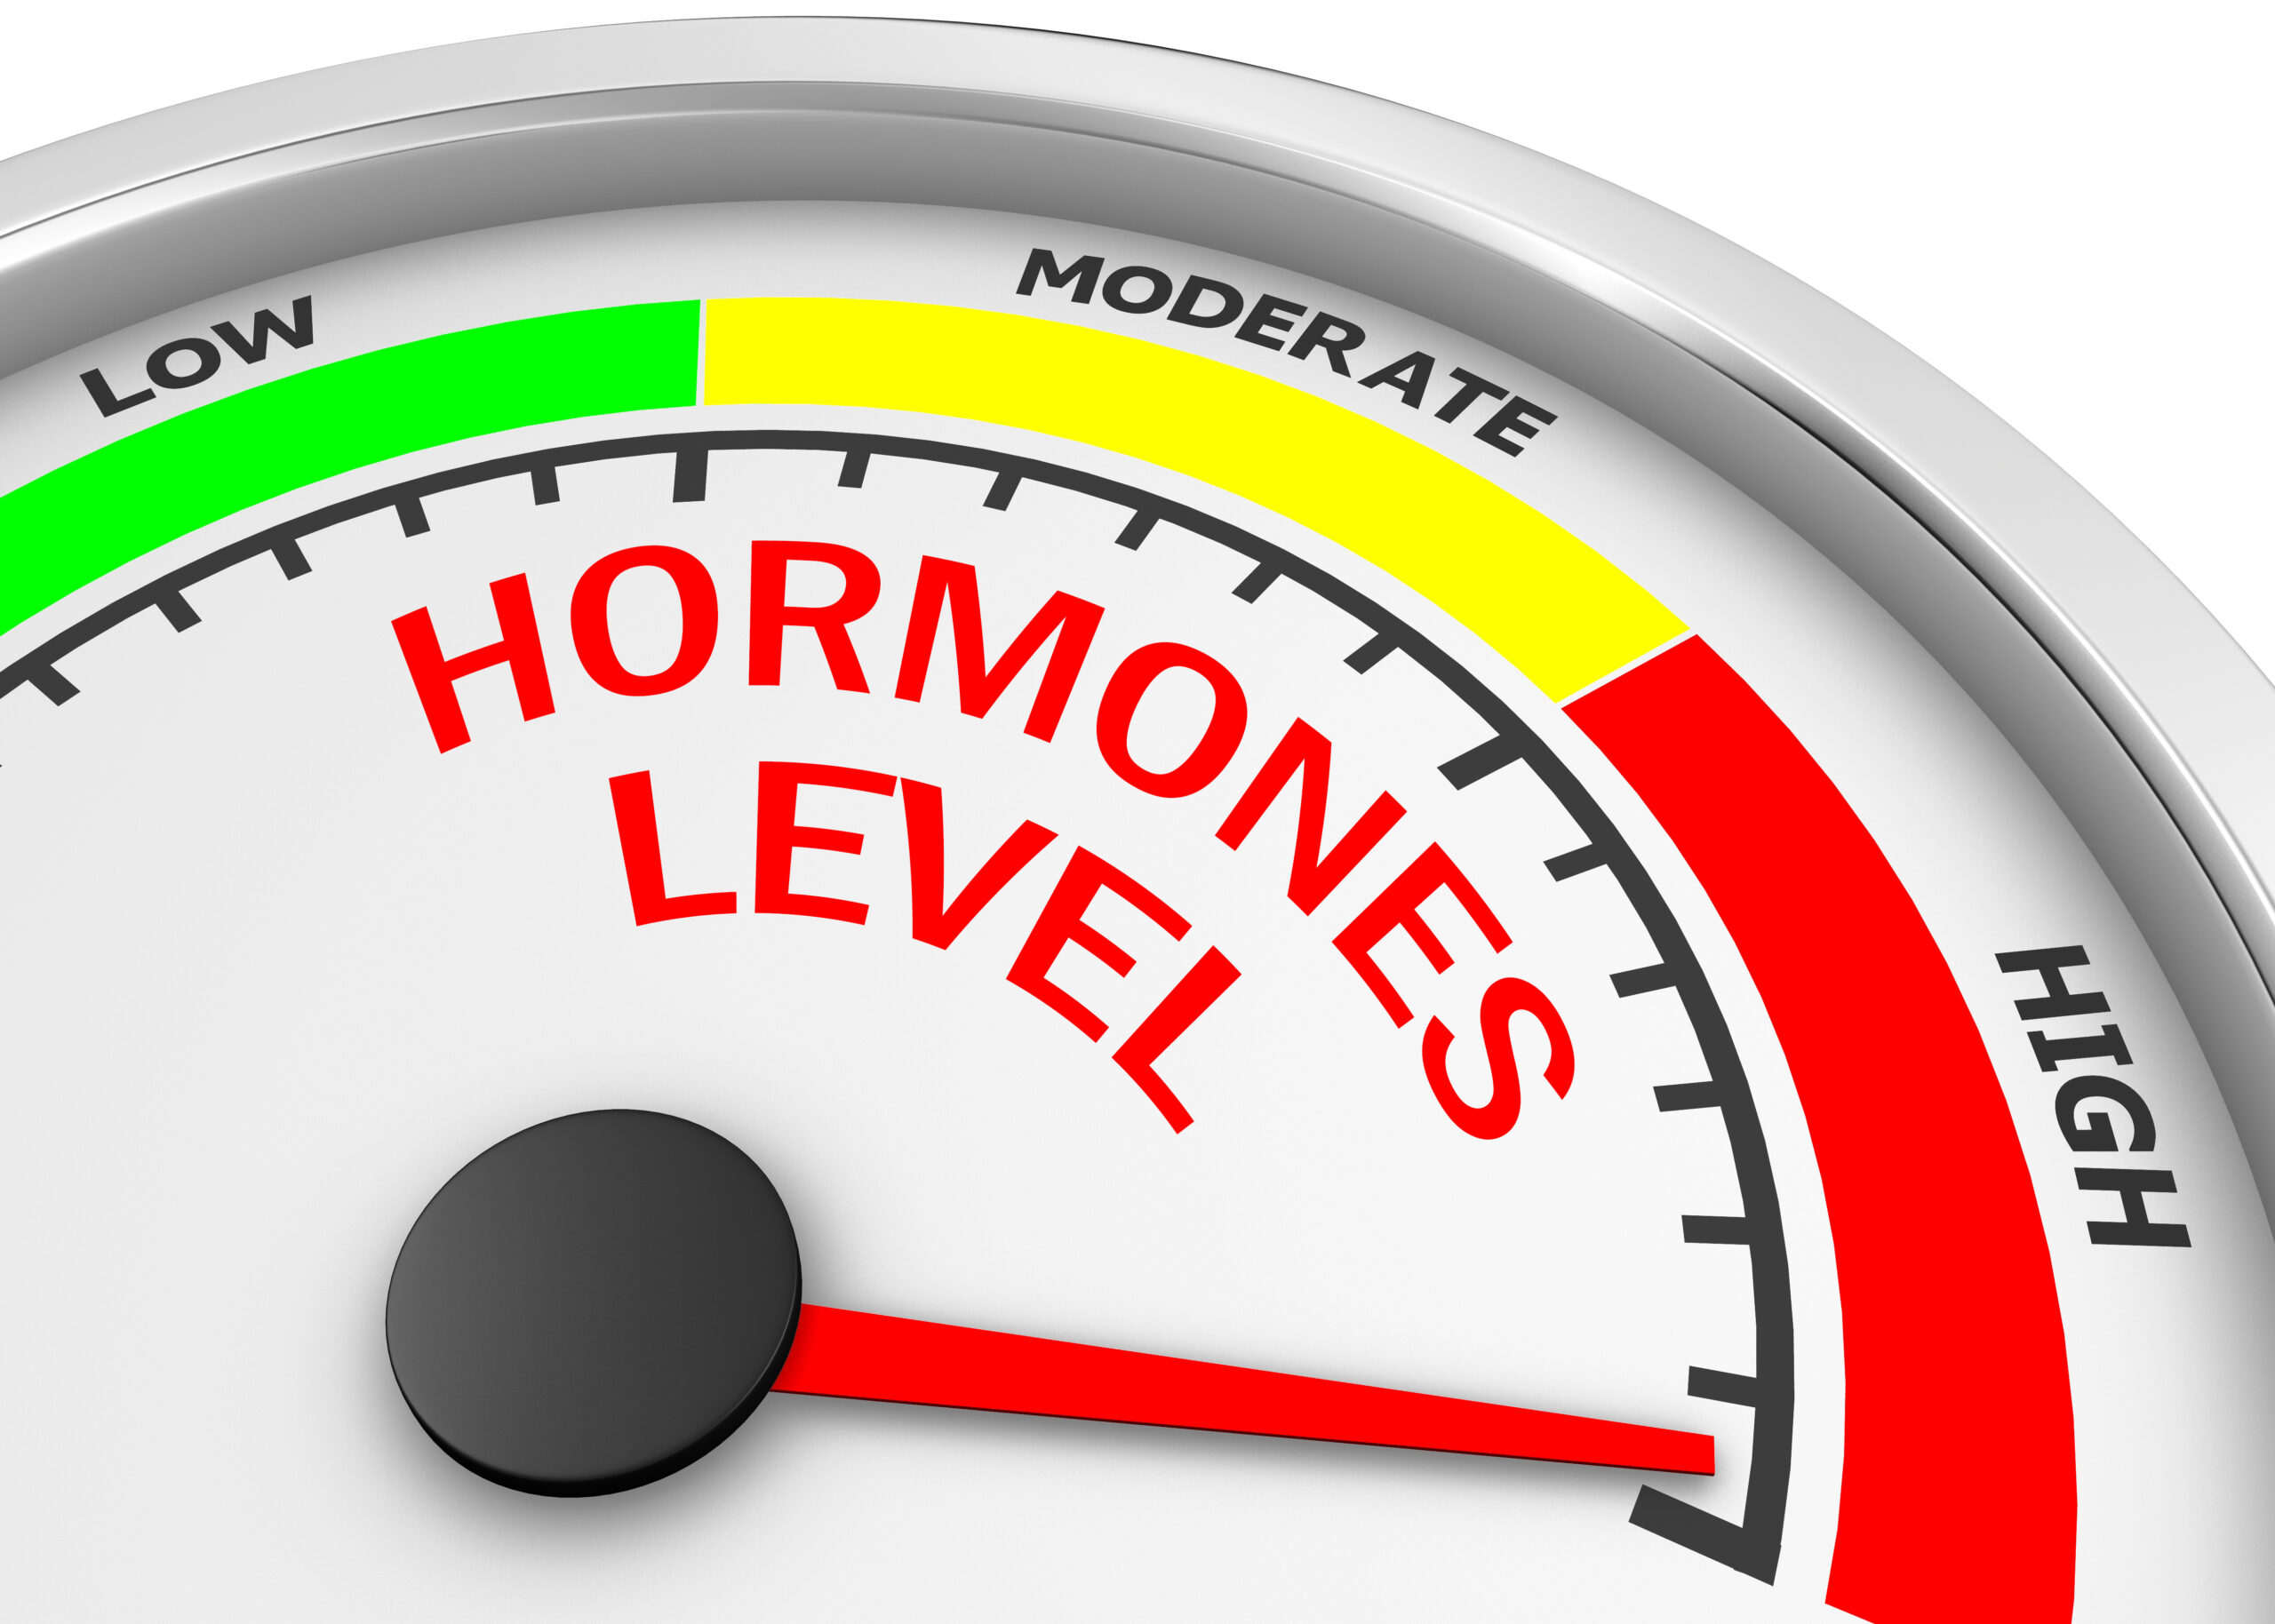 How Do Hormone Imbalances Affect Physical and Mental Health?